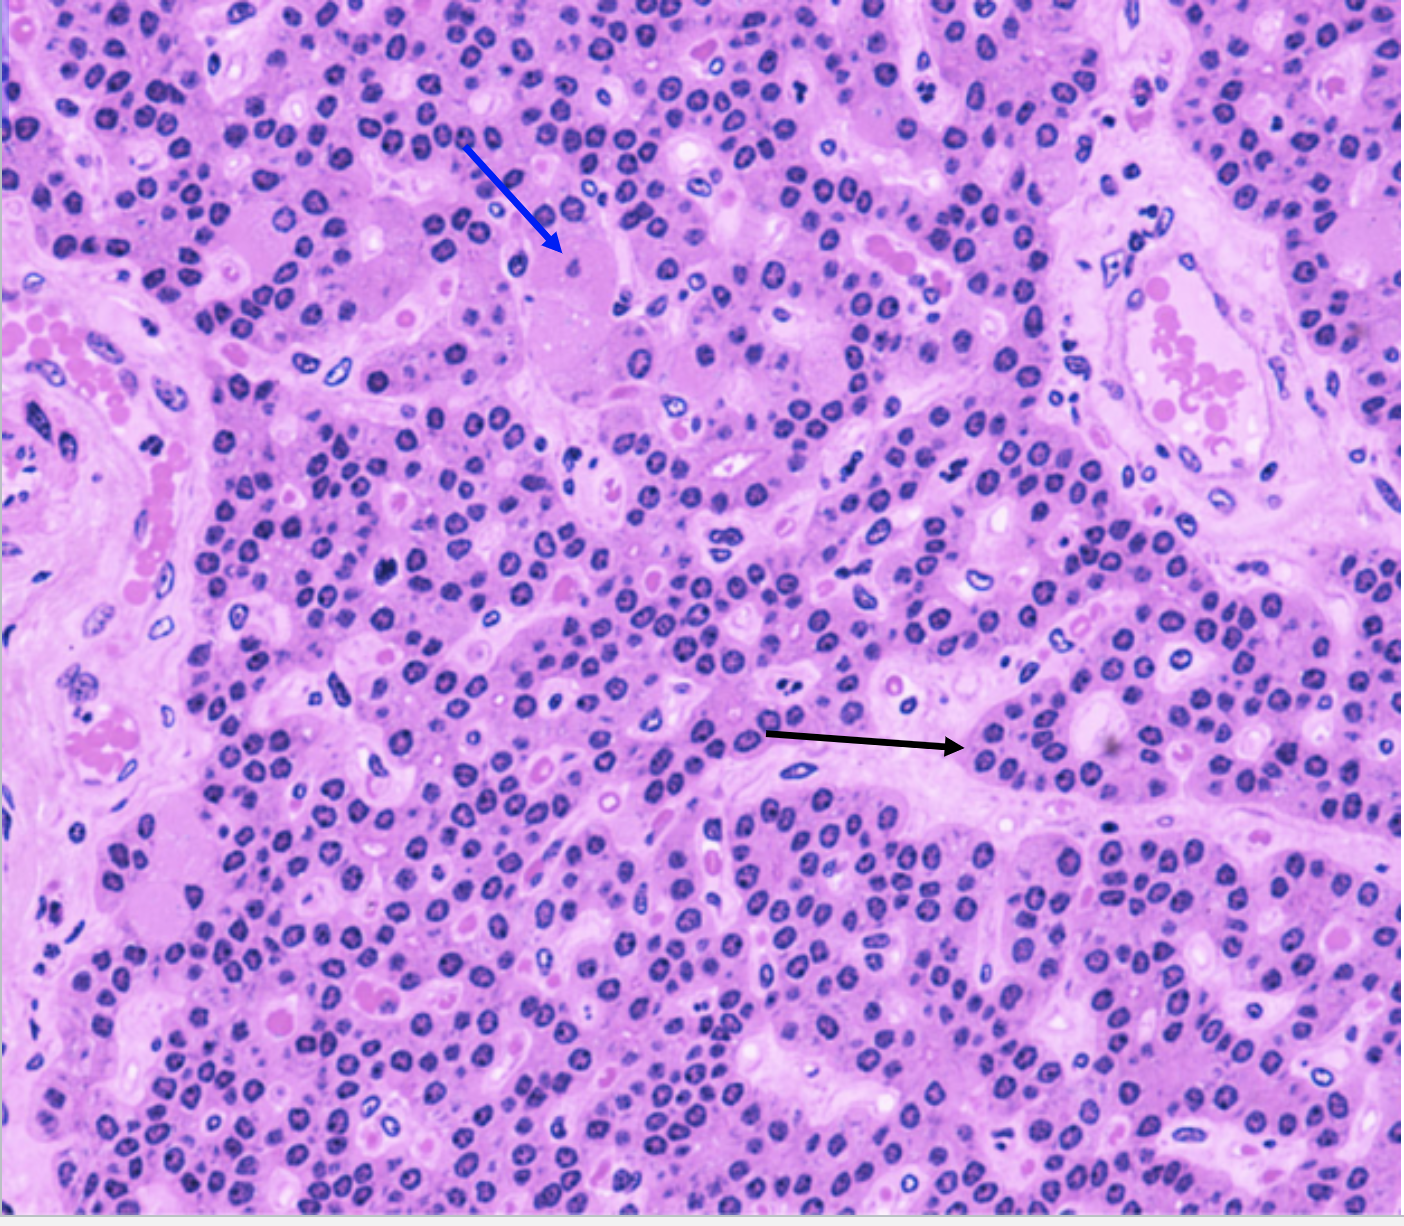 <p>In this image of the parathyroid, what does the blue arrow indicate?</p>